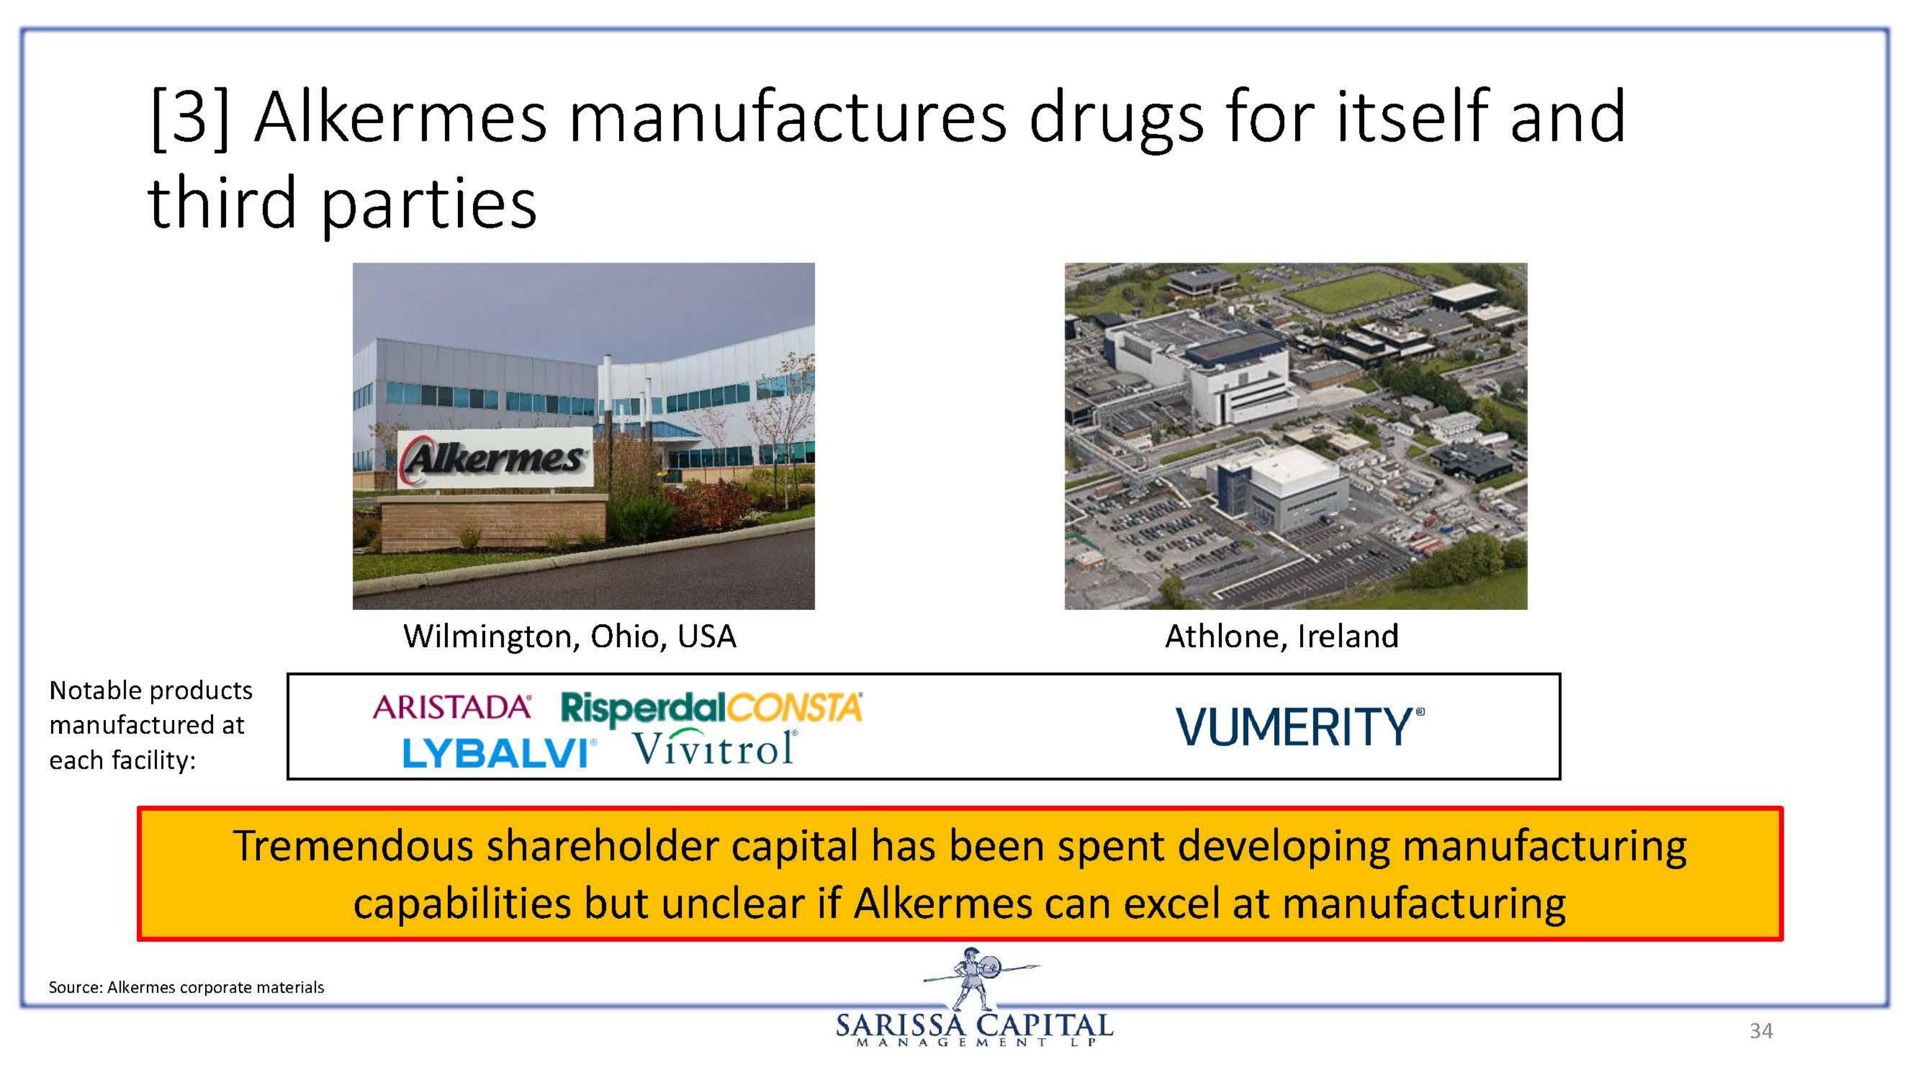 alkermes manufactures drugs for itself and third parties | Sarissa Capital